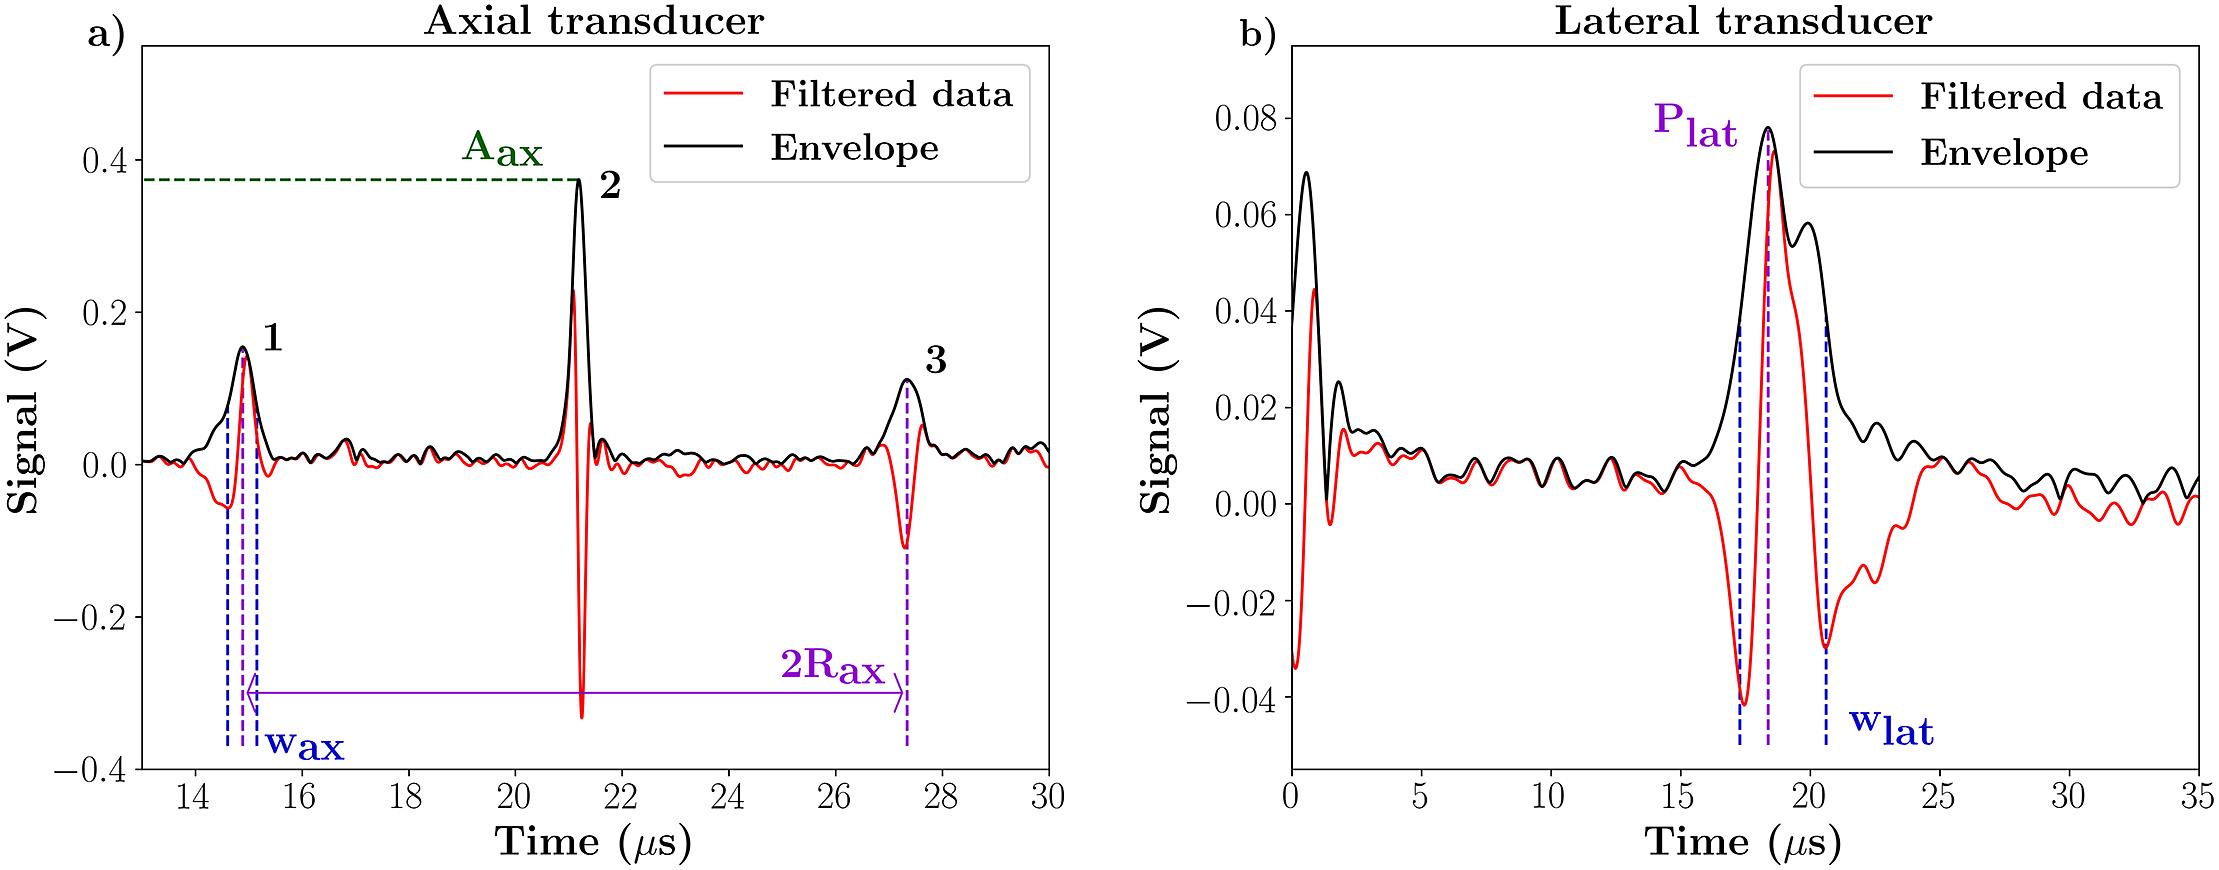 Exemplary ionoacoustic signal recorded with the (a) axial transducer and (b) the right lateral transducer. Curves represent the lowpass filtered data (red, cut-off frequencies: MHz for the axial transducer and MHz for the right transducer) and the signal envelope (black). The read-out positions for the deduction of the bunch properties from the signal envelope are marked by dashed lines. For the axial transducer, the arrival time difference between the first and the third maxima corresponds to twice the proton bunch range , the pulse width is related to the width of the BP and the amplitude reveals the bunch particle number. For the lateral transducers, the position of the maximum is used to define the lateral bunch position and the pulse width relates to the lateral bunch diameter.